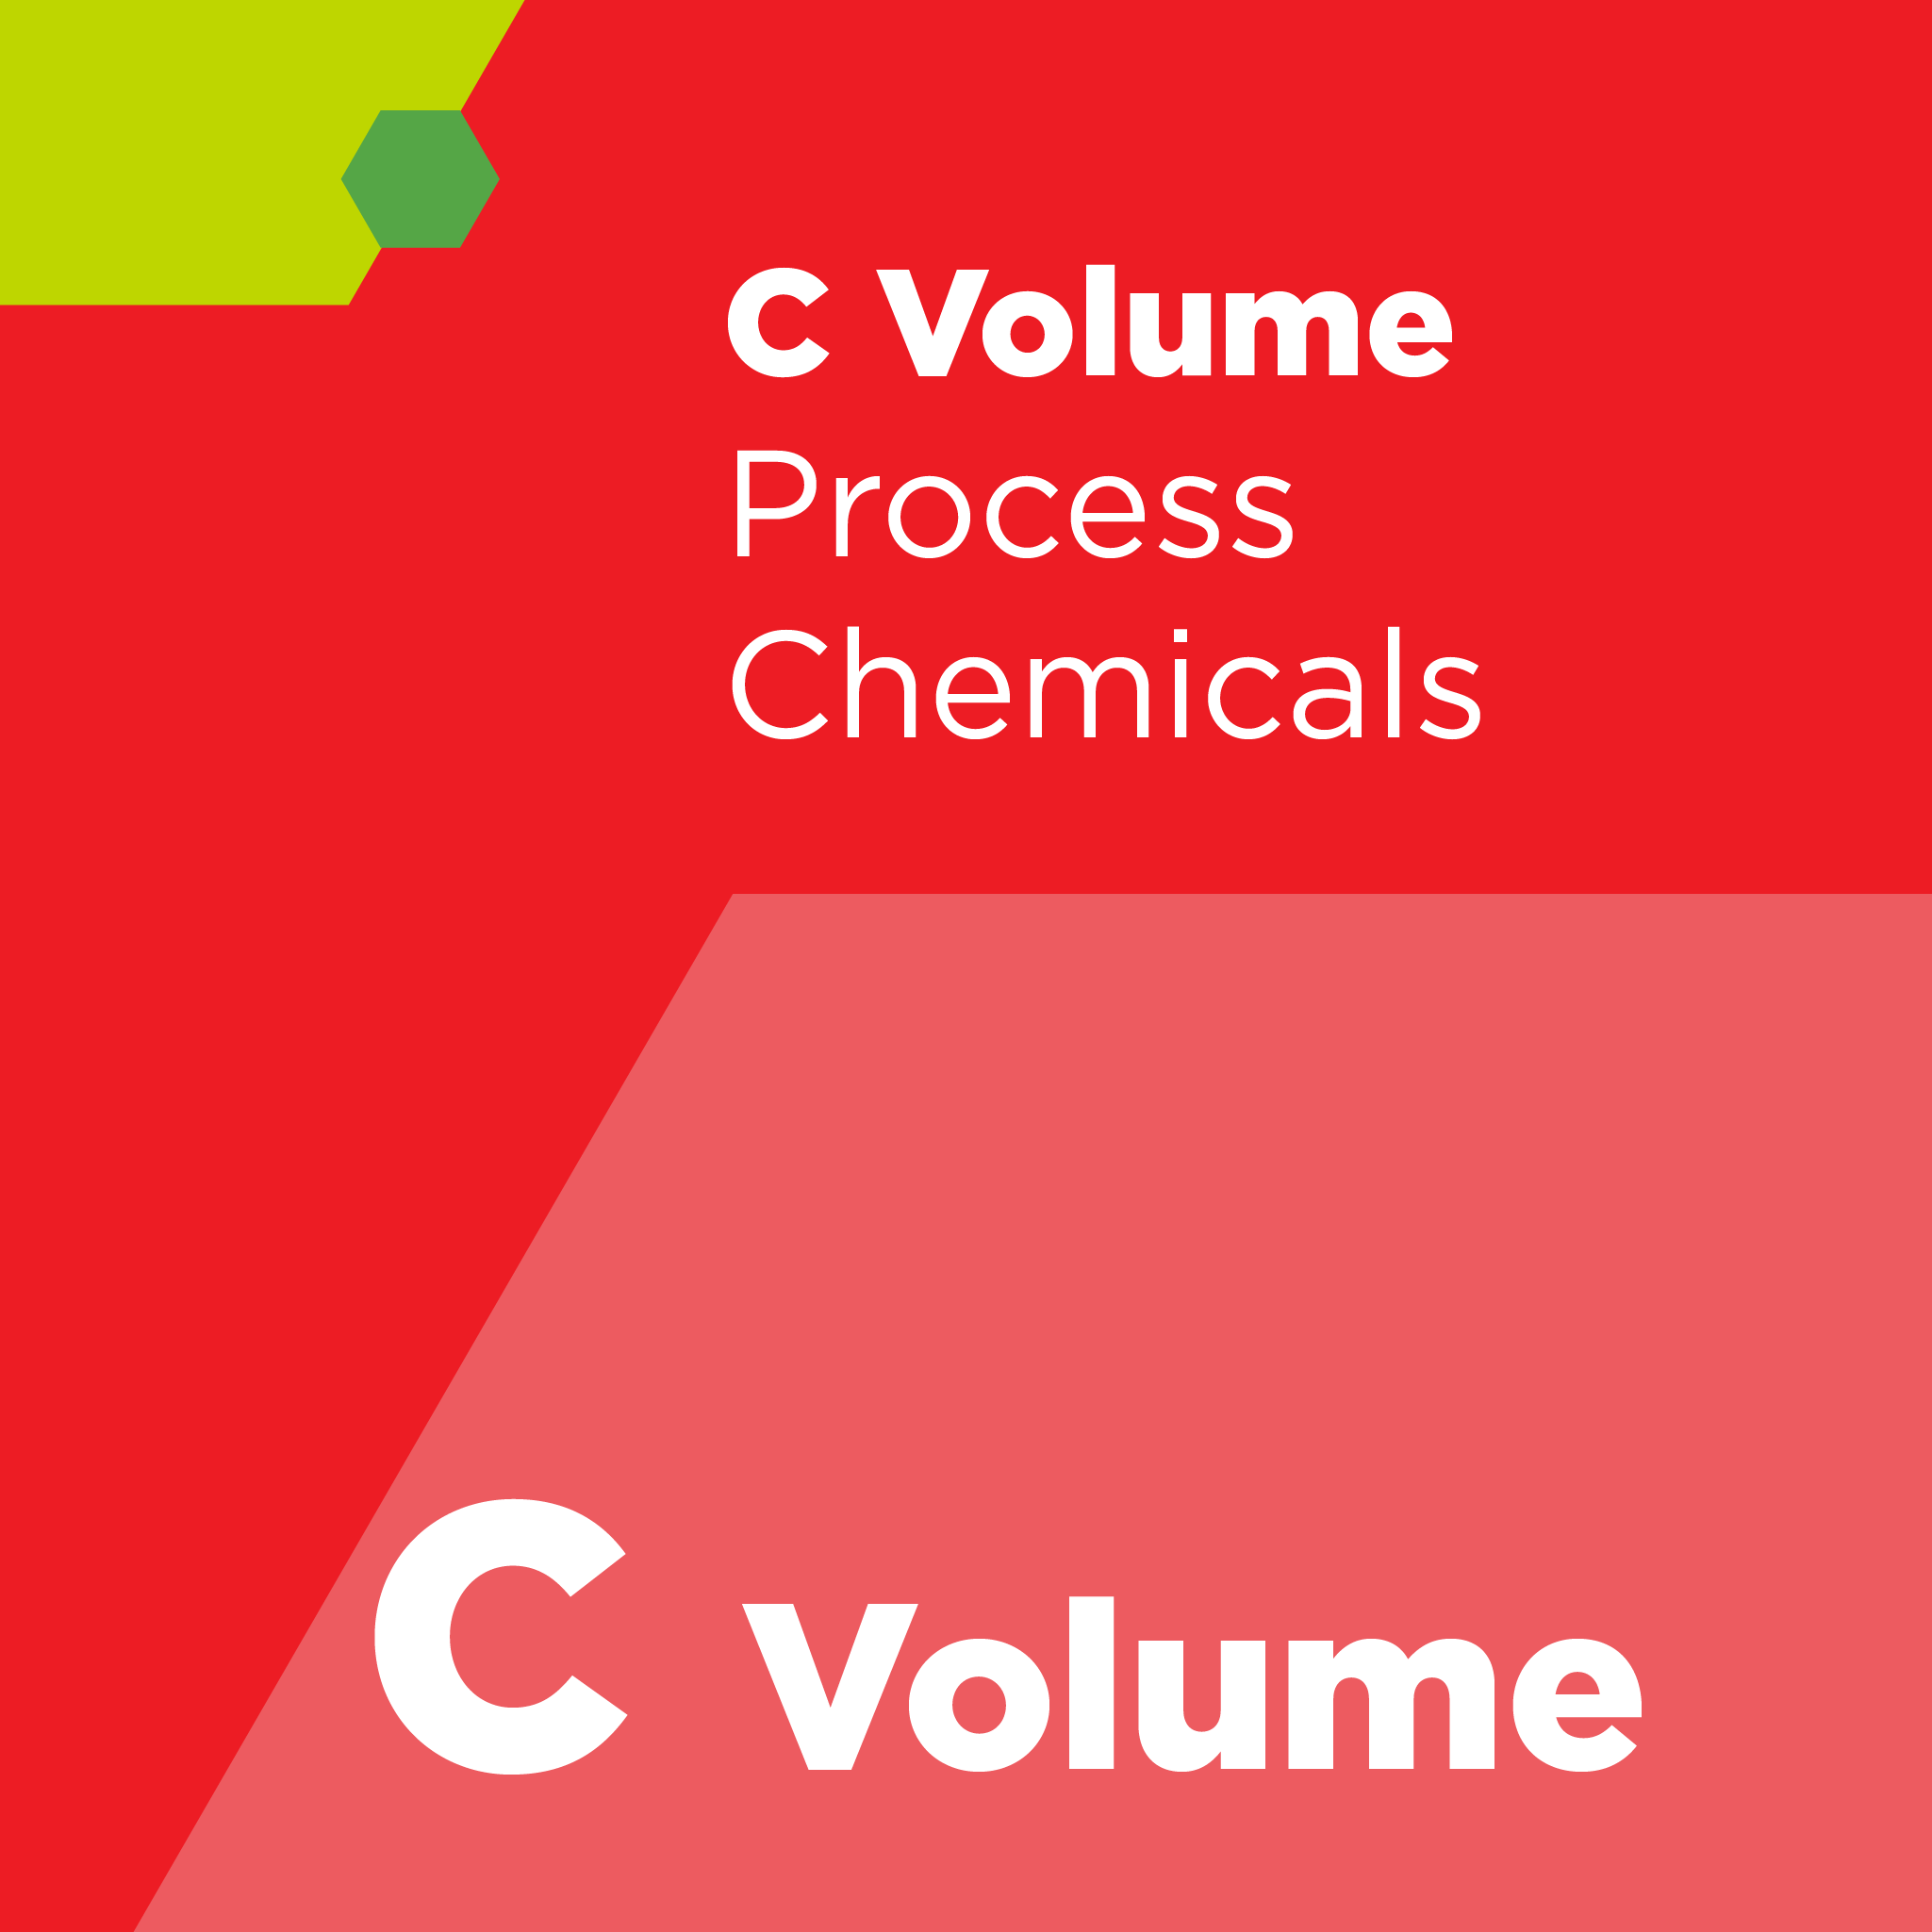 C01900 - SEMI C19 - Specification for Acetone